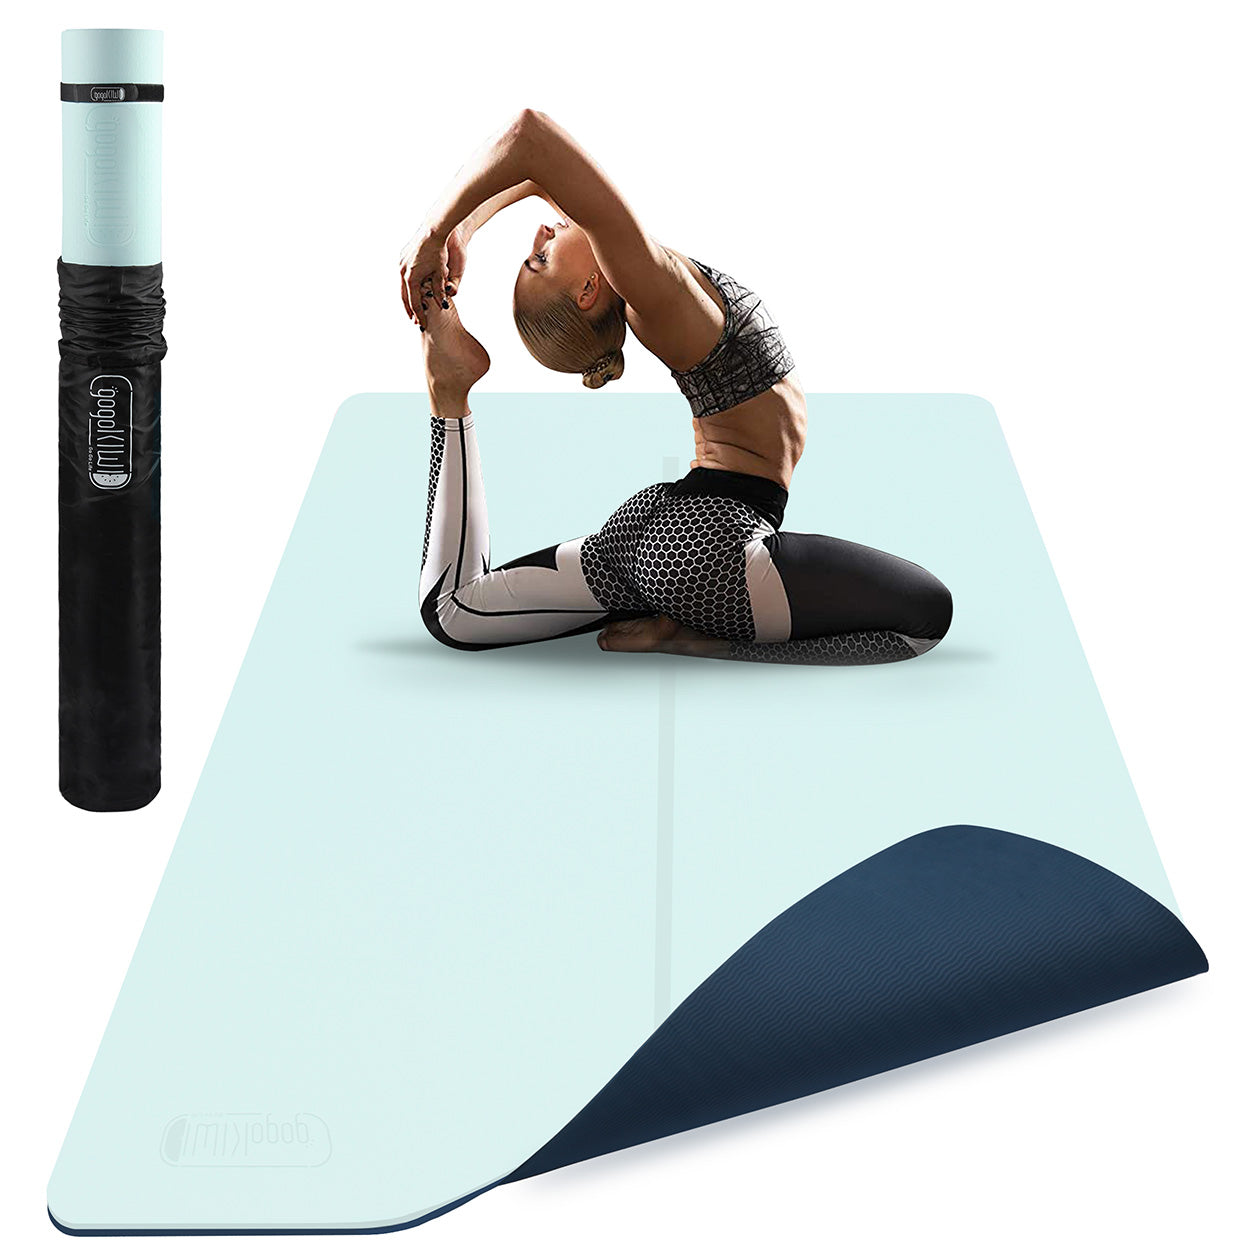 Best Extra Large Yoga Mat for Home Workouts